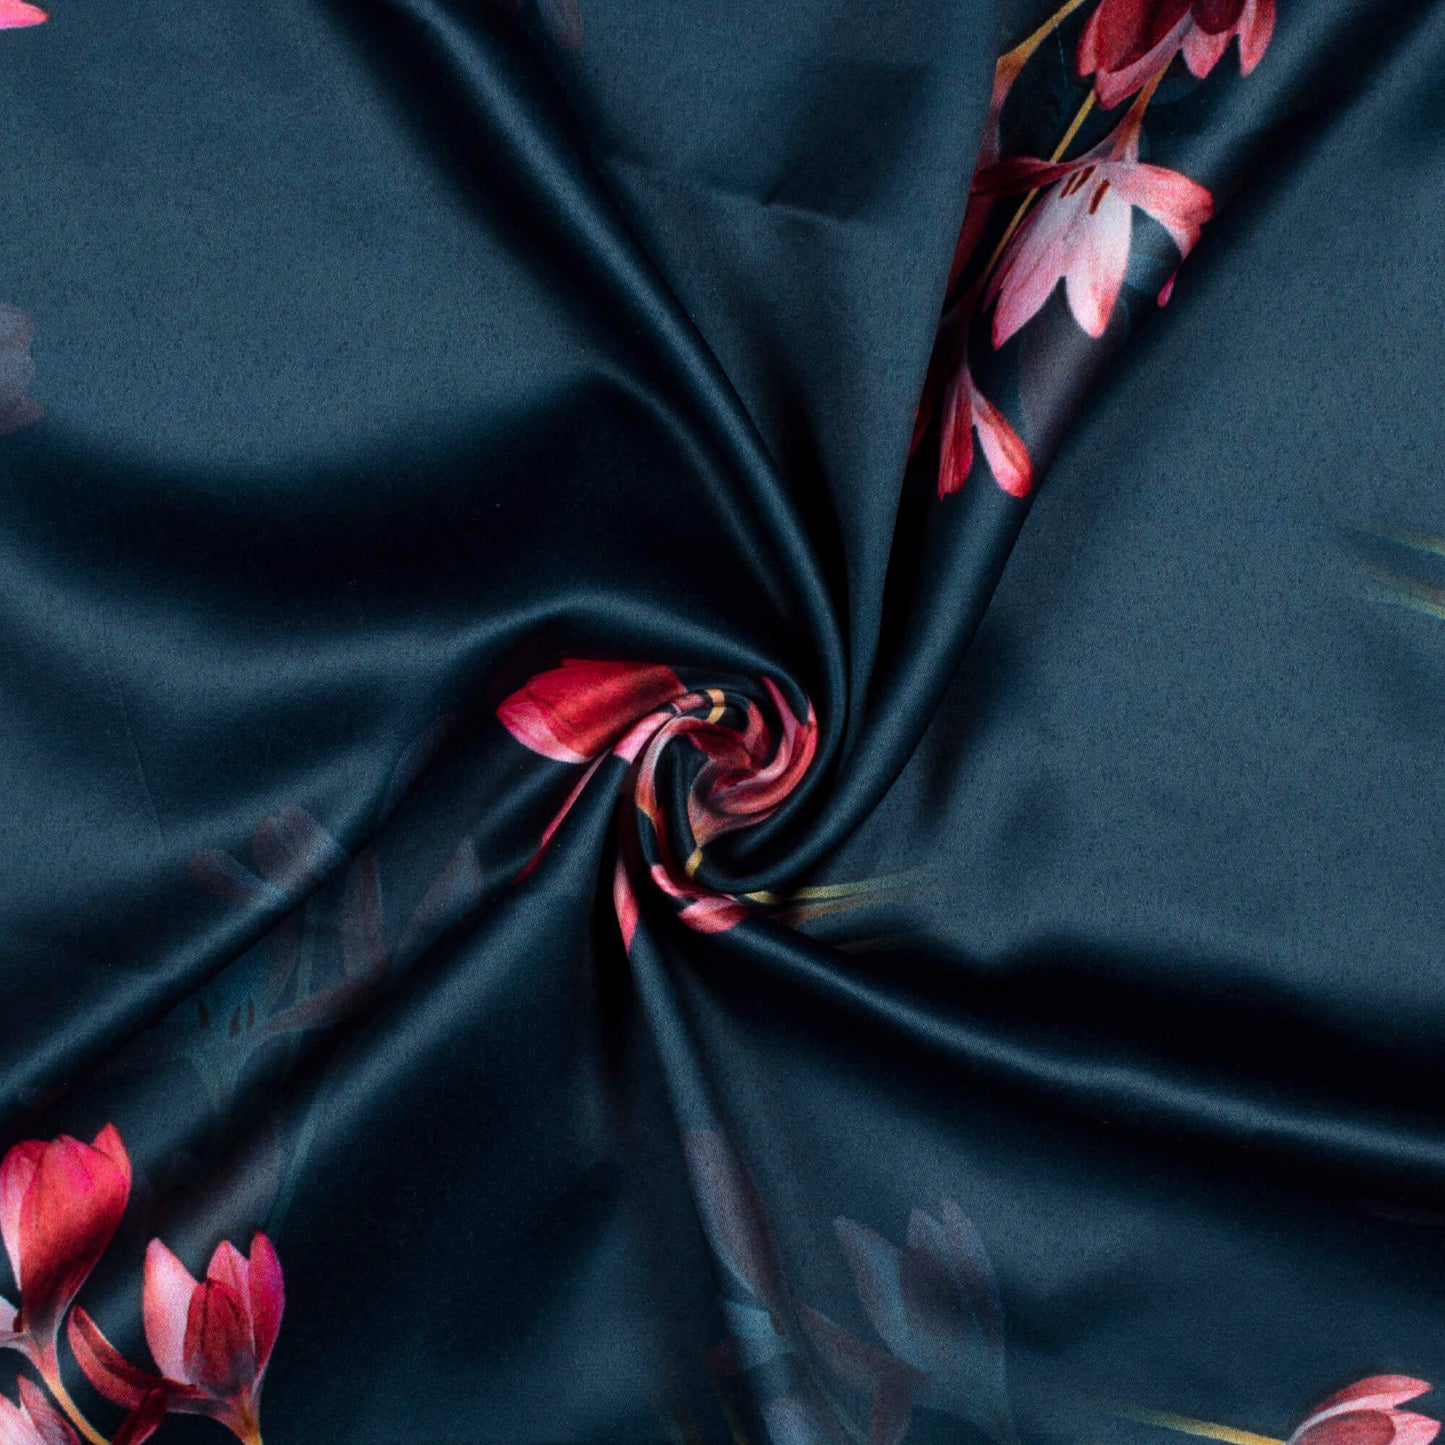 Midnight Blue And Deep Pink Floral Pattern Digital Print Charmeuse Satin Fabric (Width 58 Inches)